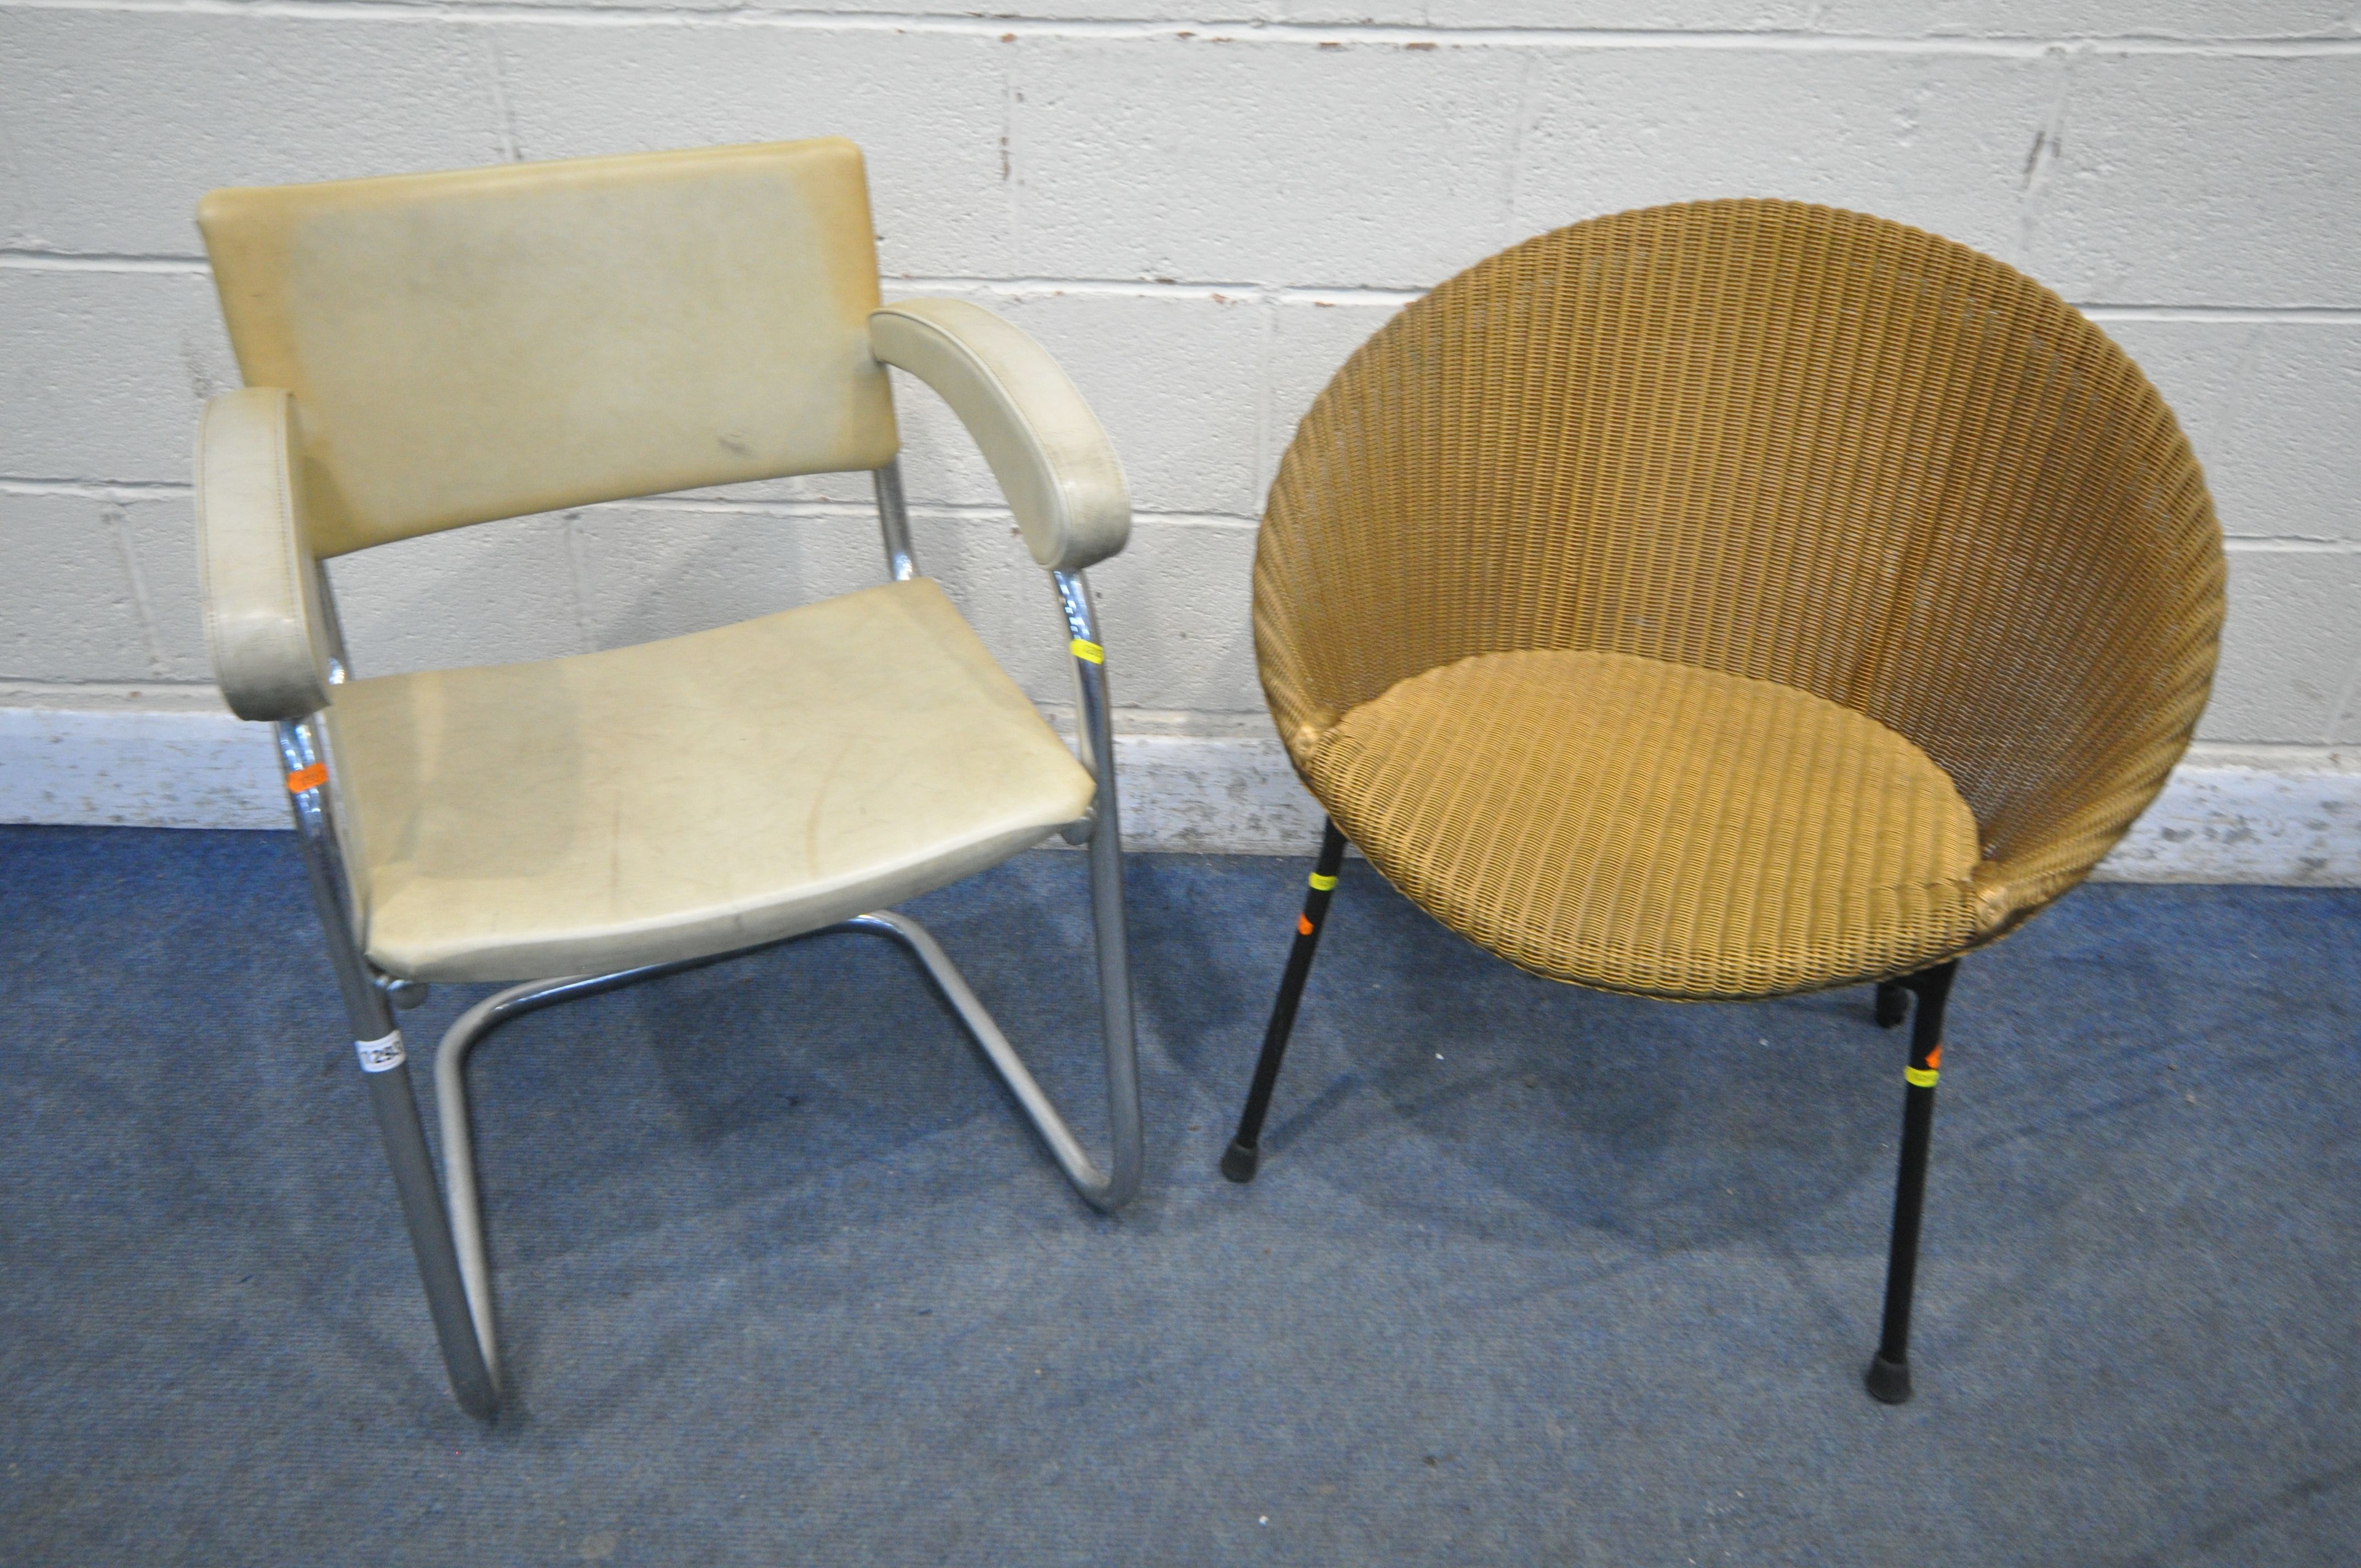 A LLOYD LOOM WICKER SATELLITE CHAIR, on metal legs, along with a mid-century cream leatherette and